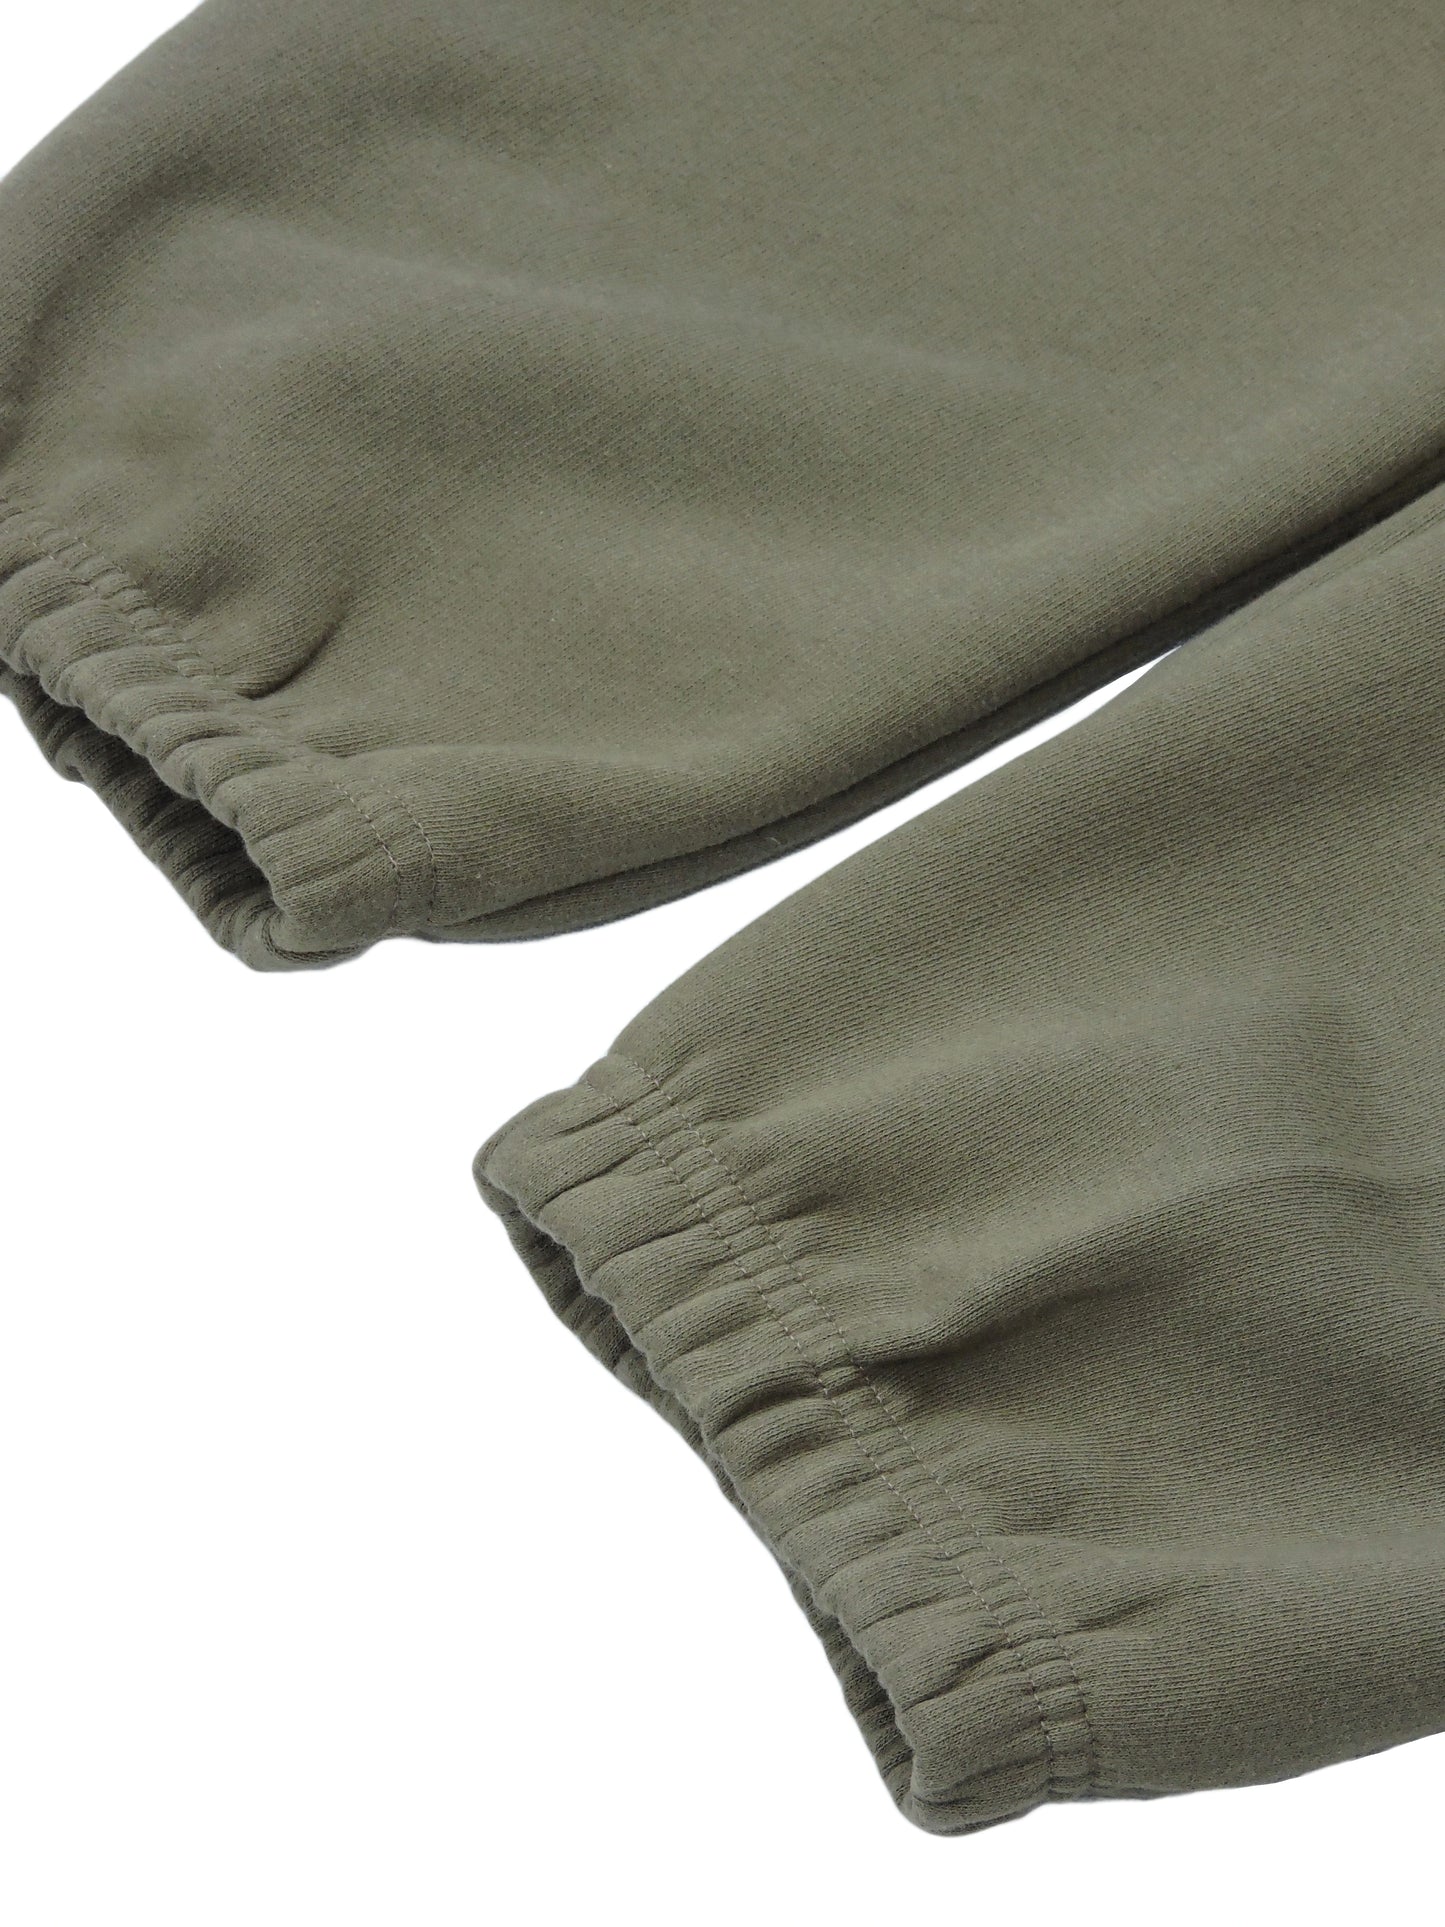 French Terry Straight Sweatpant - Moss